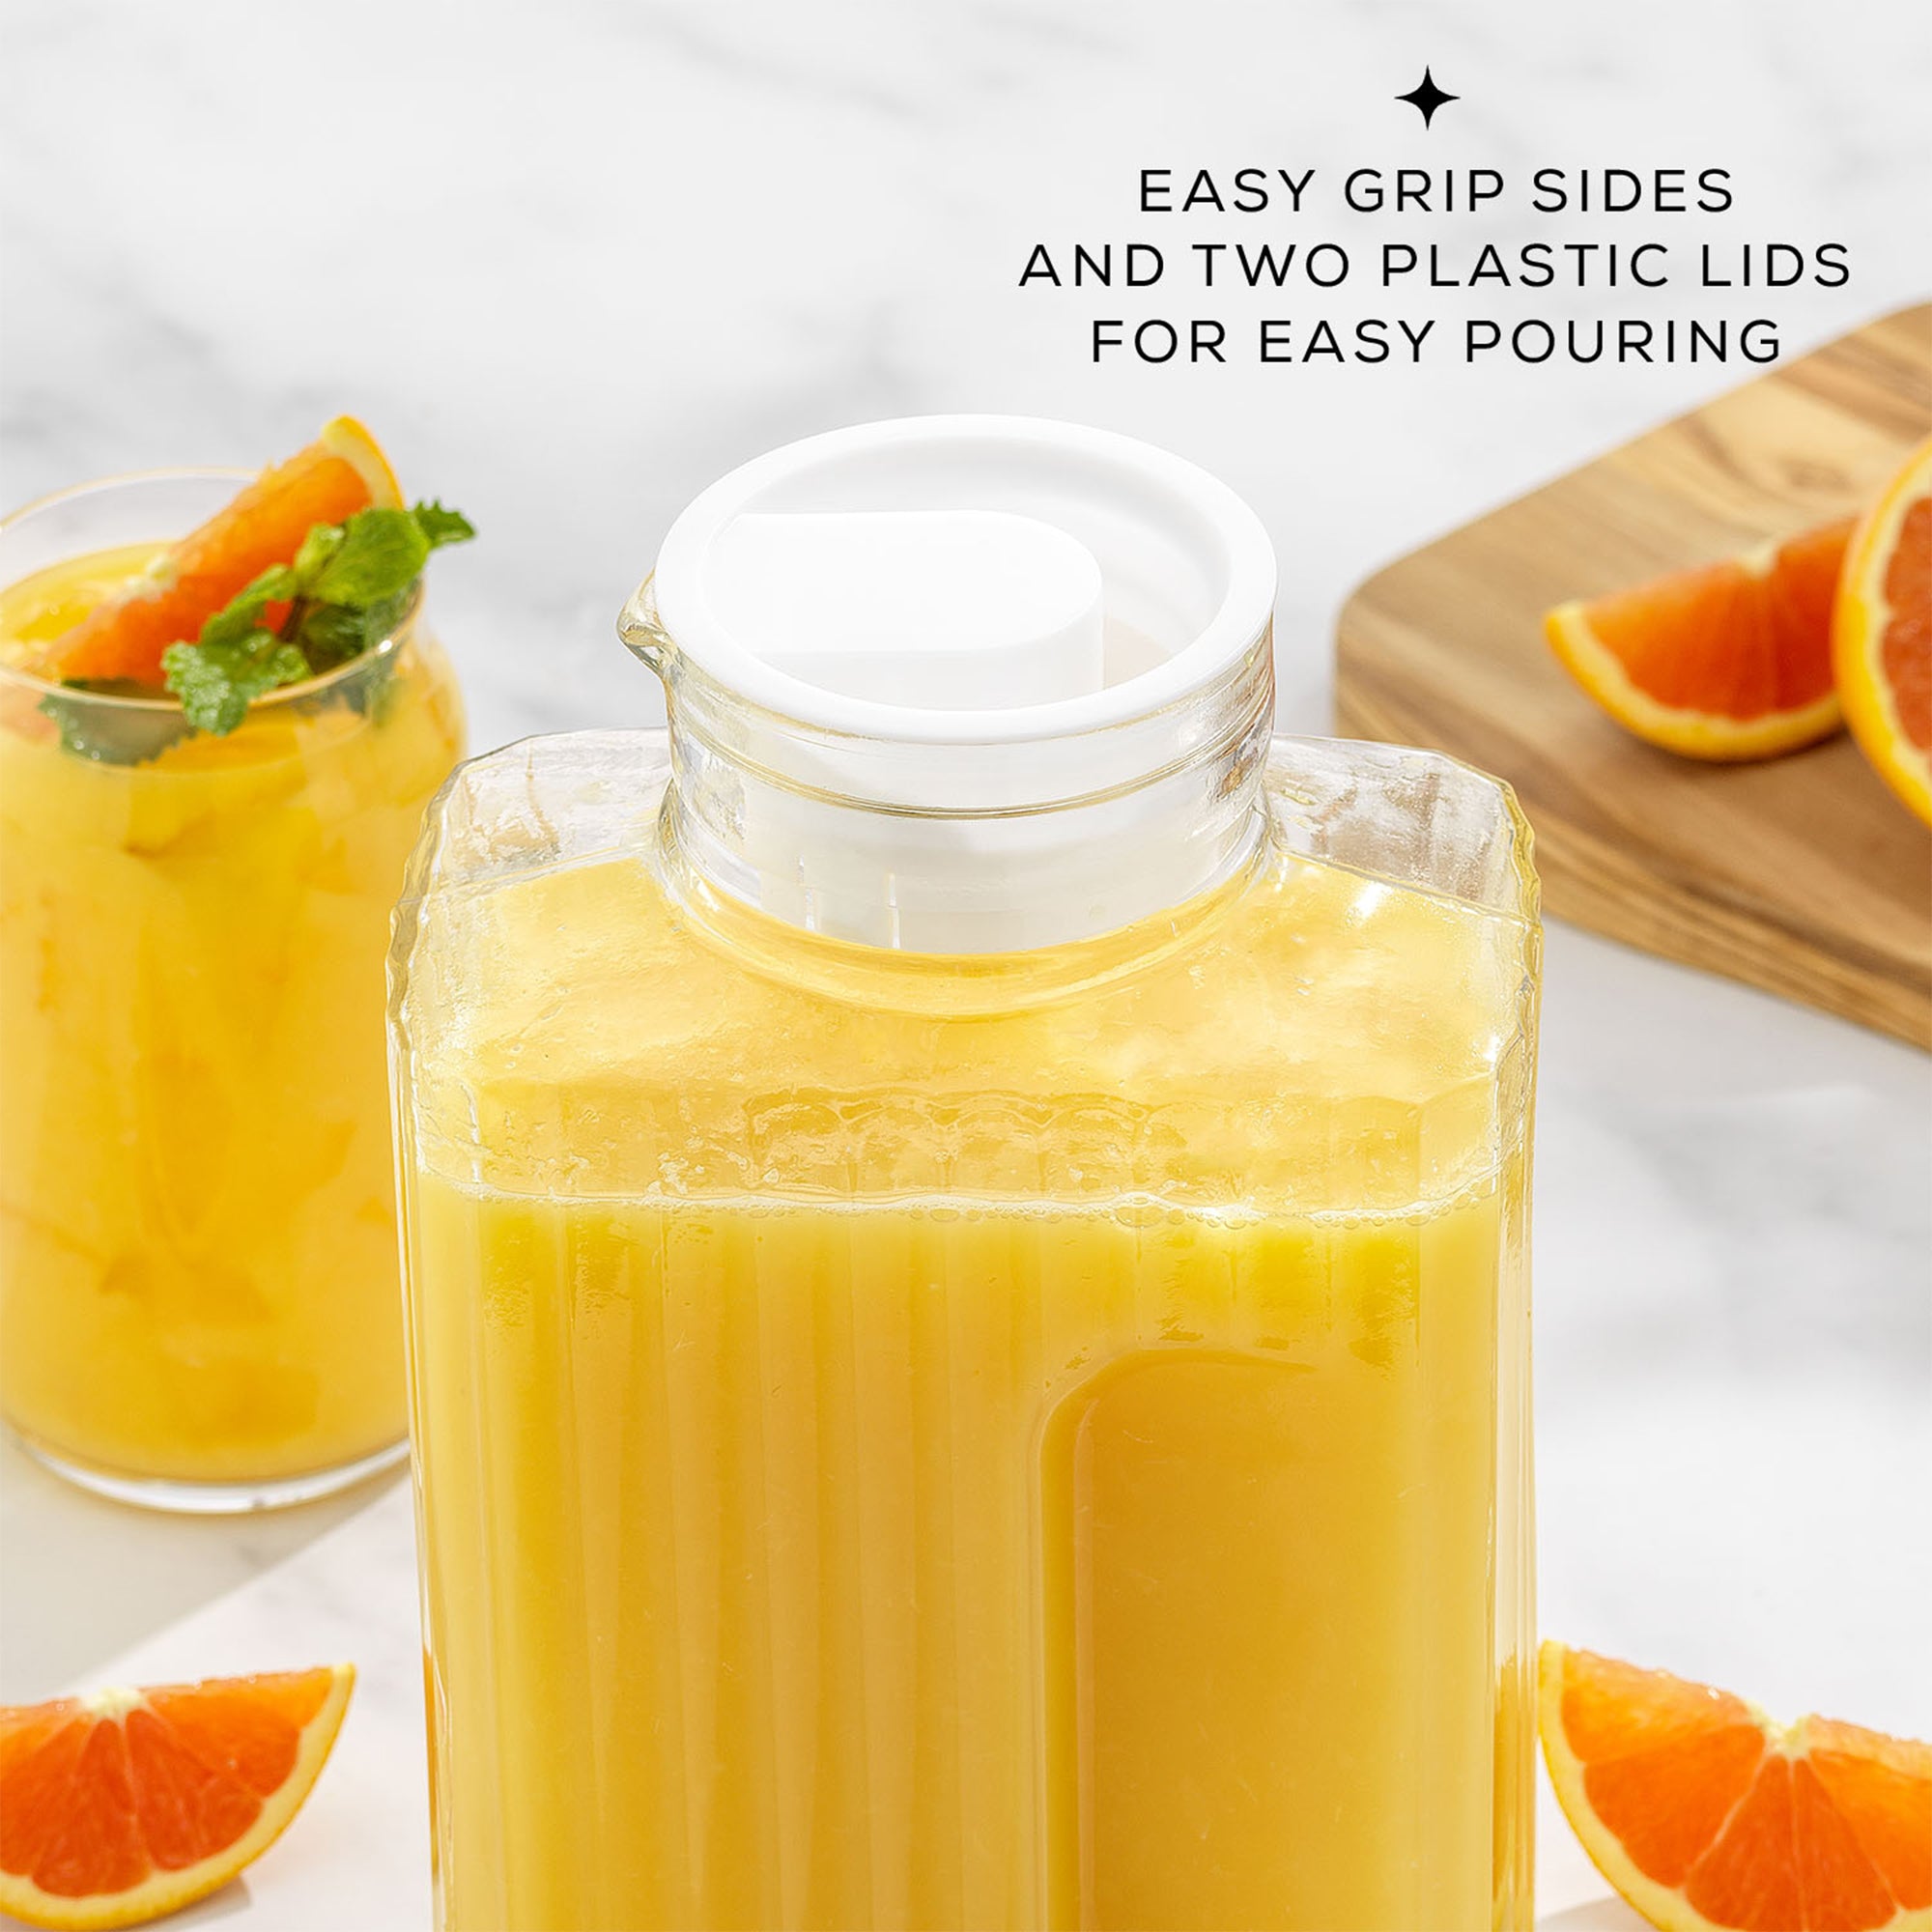 A clear square-shaped JoyJolt Beverage Serveware Glass Pitcher filled with orange juice, featuring easy-grip sides and two plastic lids for simple pouring, with fresh orange slices in the background.